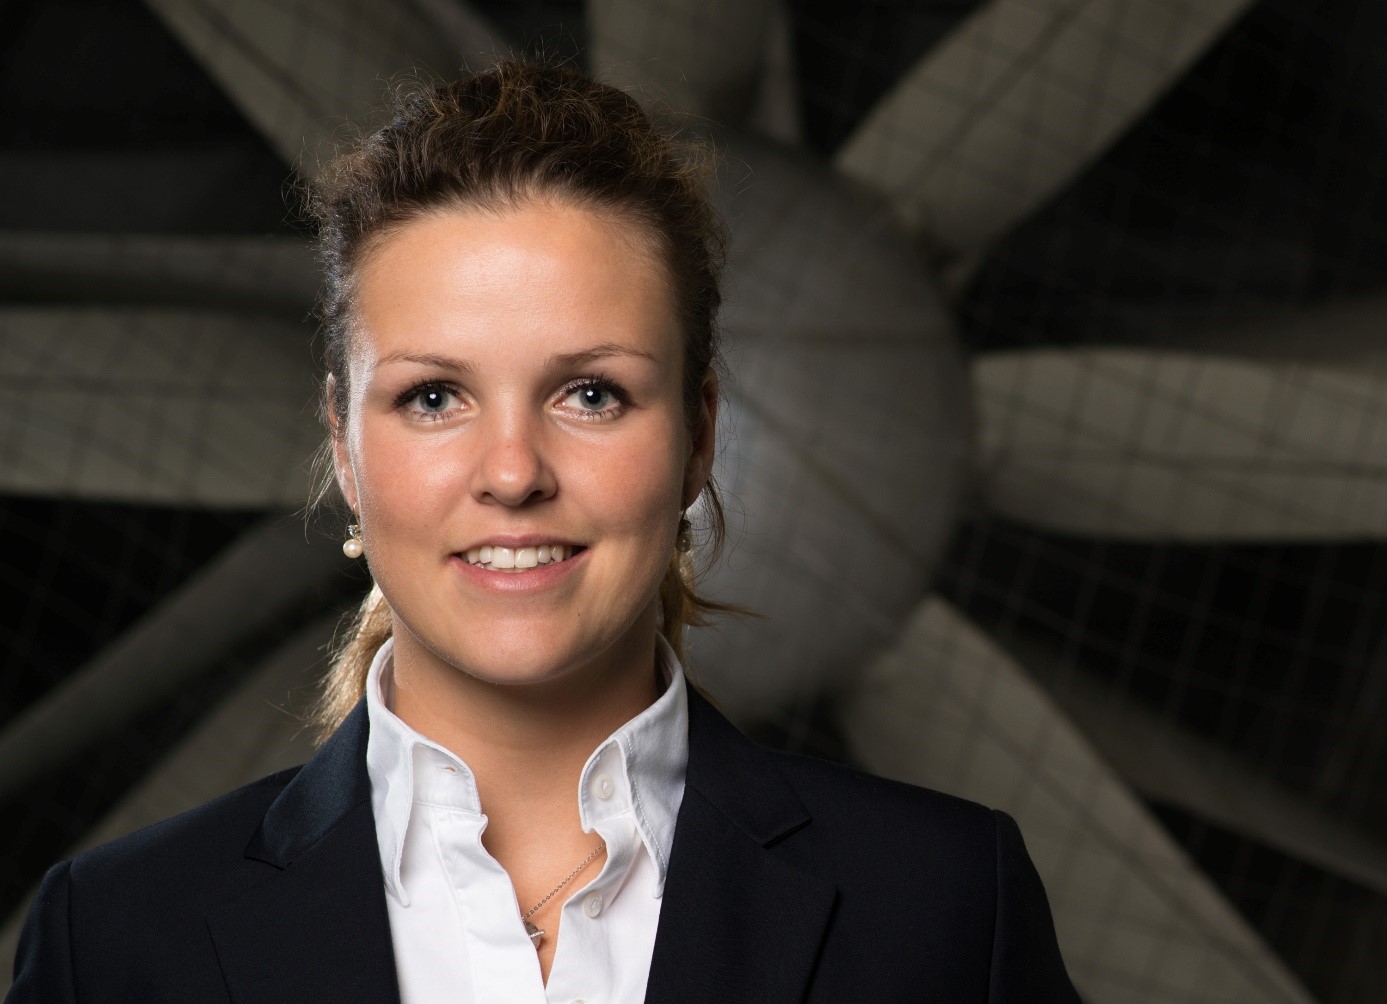 Katharina Kreitz is the Co-founder of Vectoflow, which is located in the ESA BIC in Oberpfaffenhofen, close to the company’s supersonic wind tunnel.